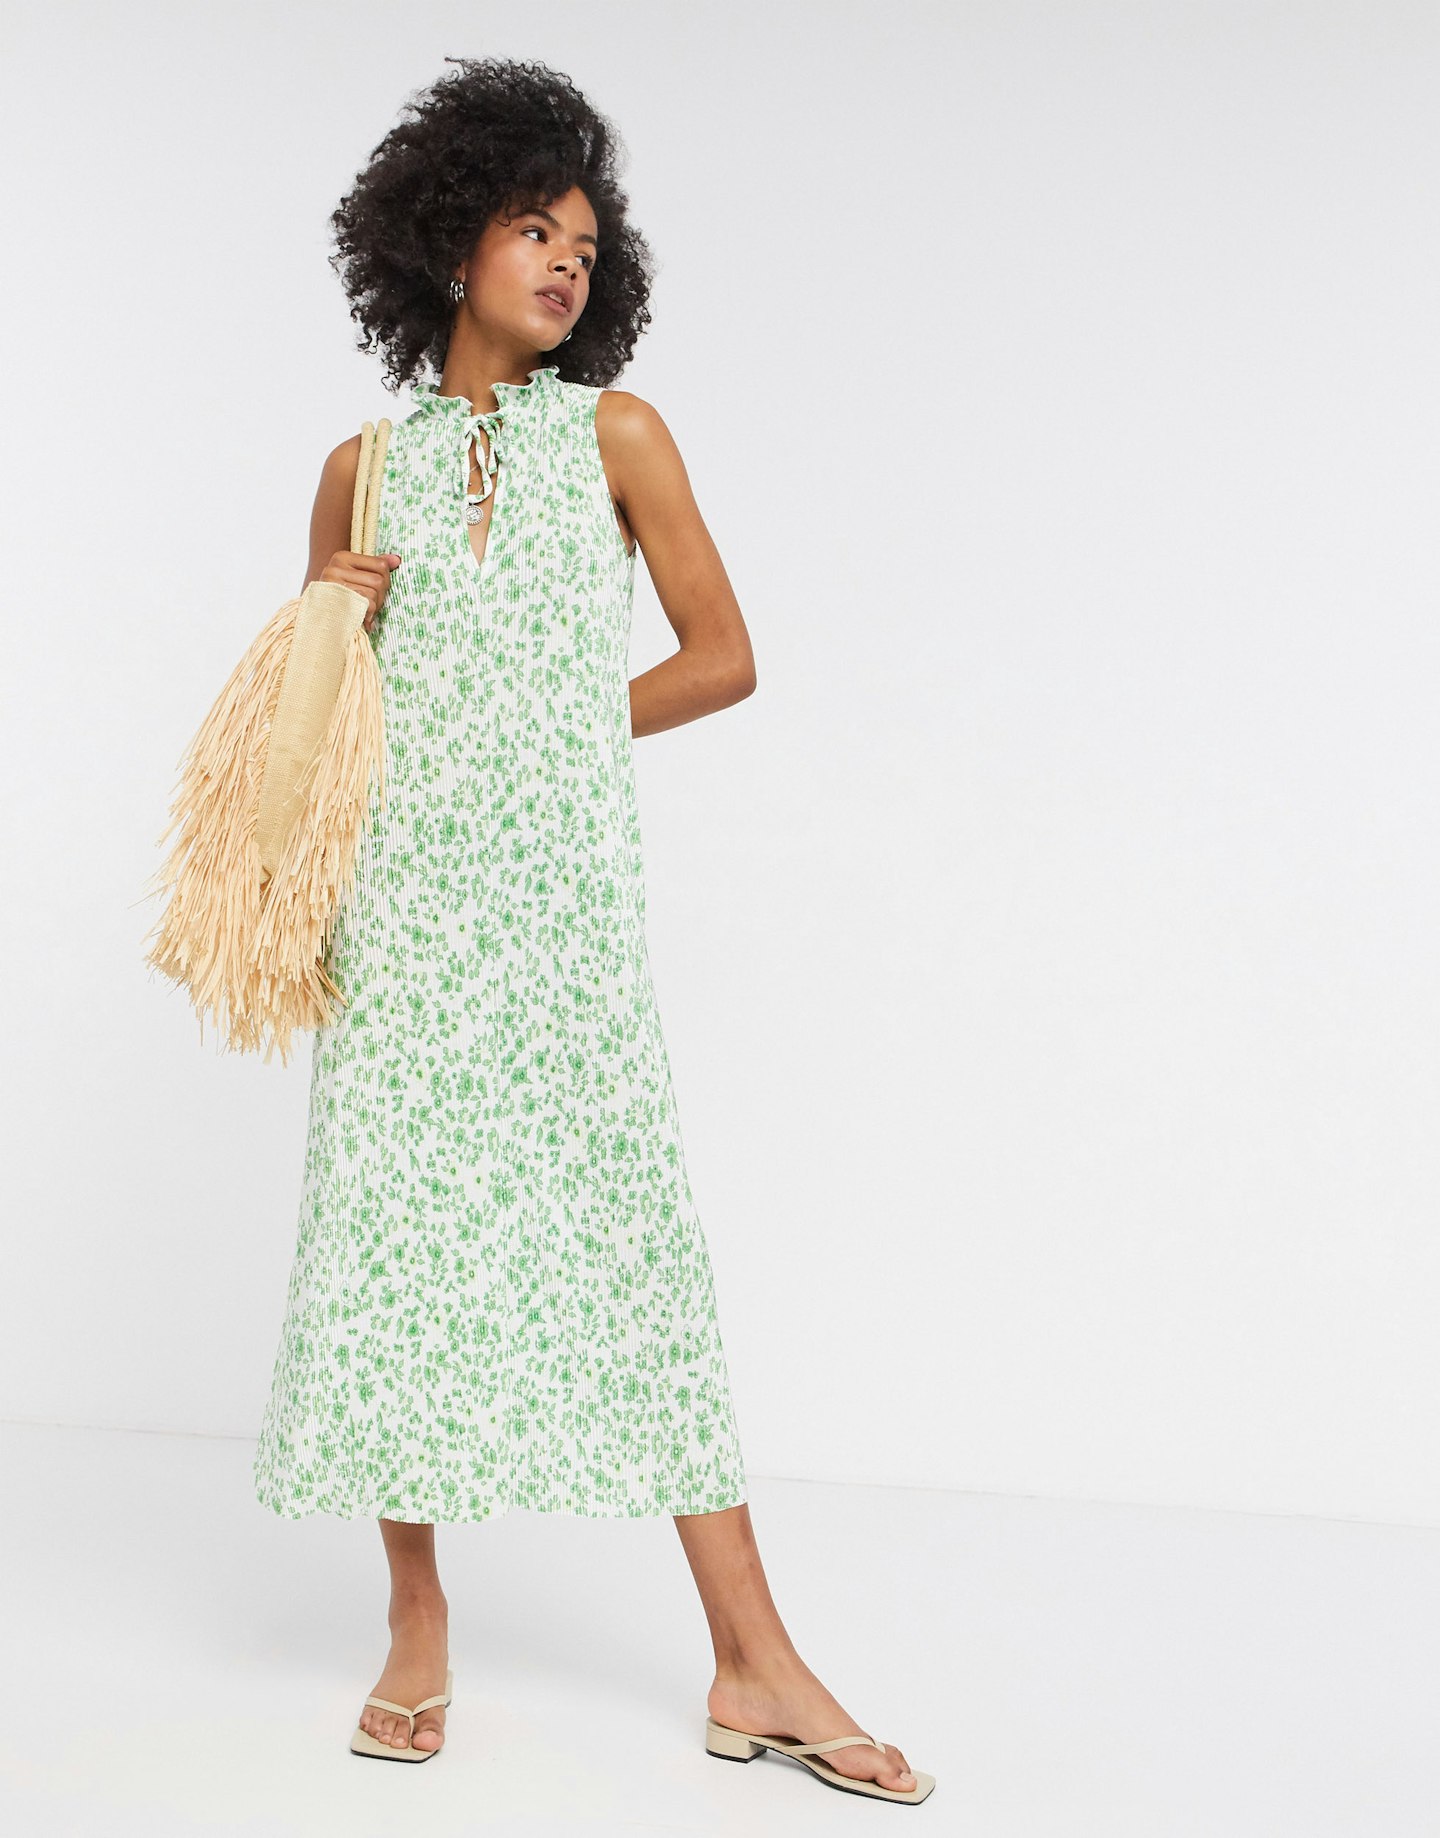 ASOS DESIGN, plisse midi dress with frill neck in green floral, £30